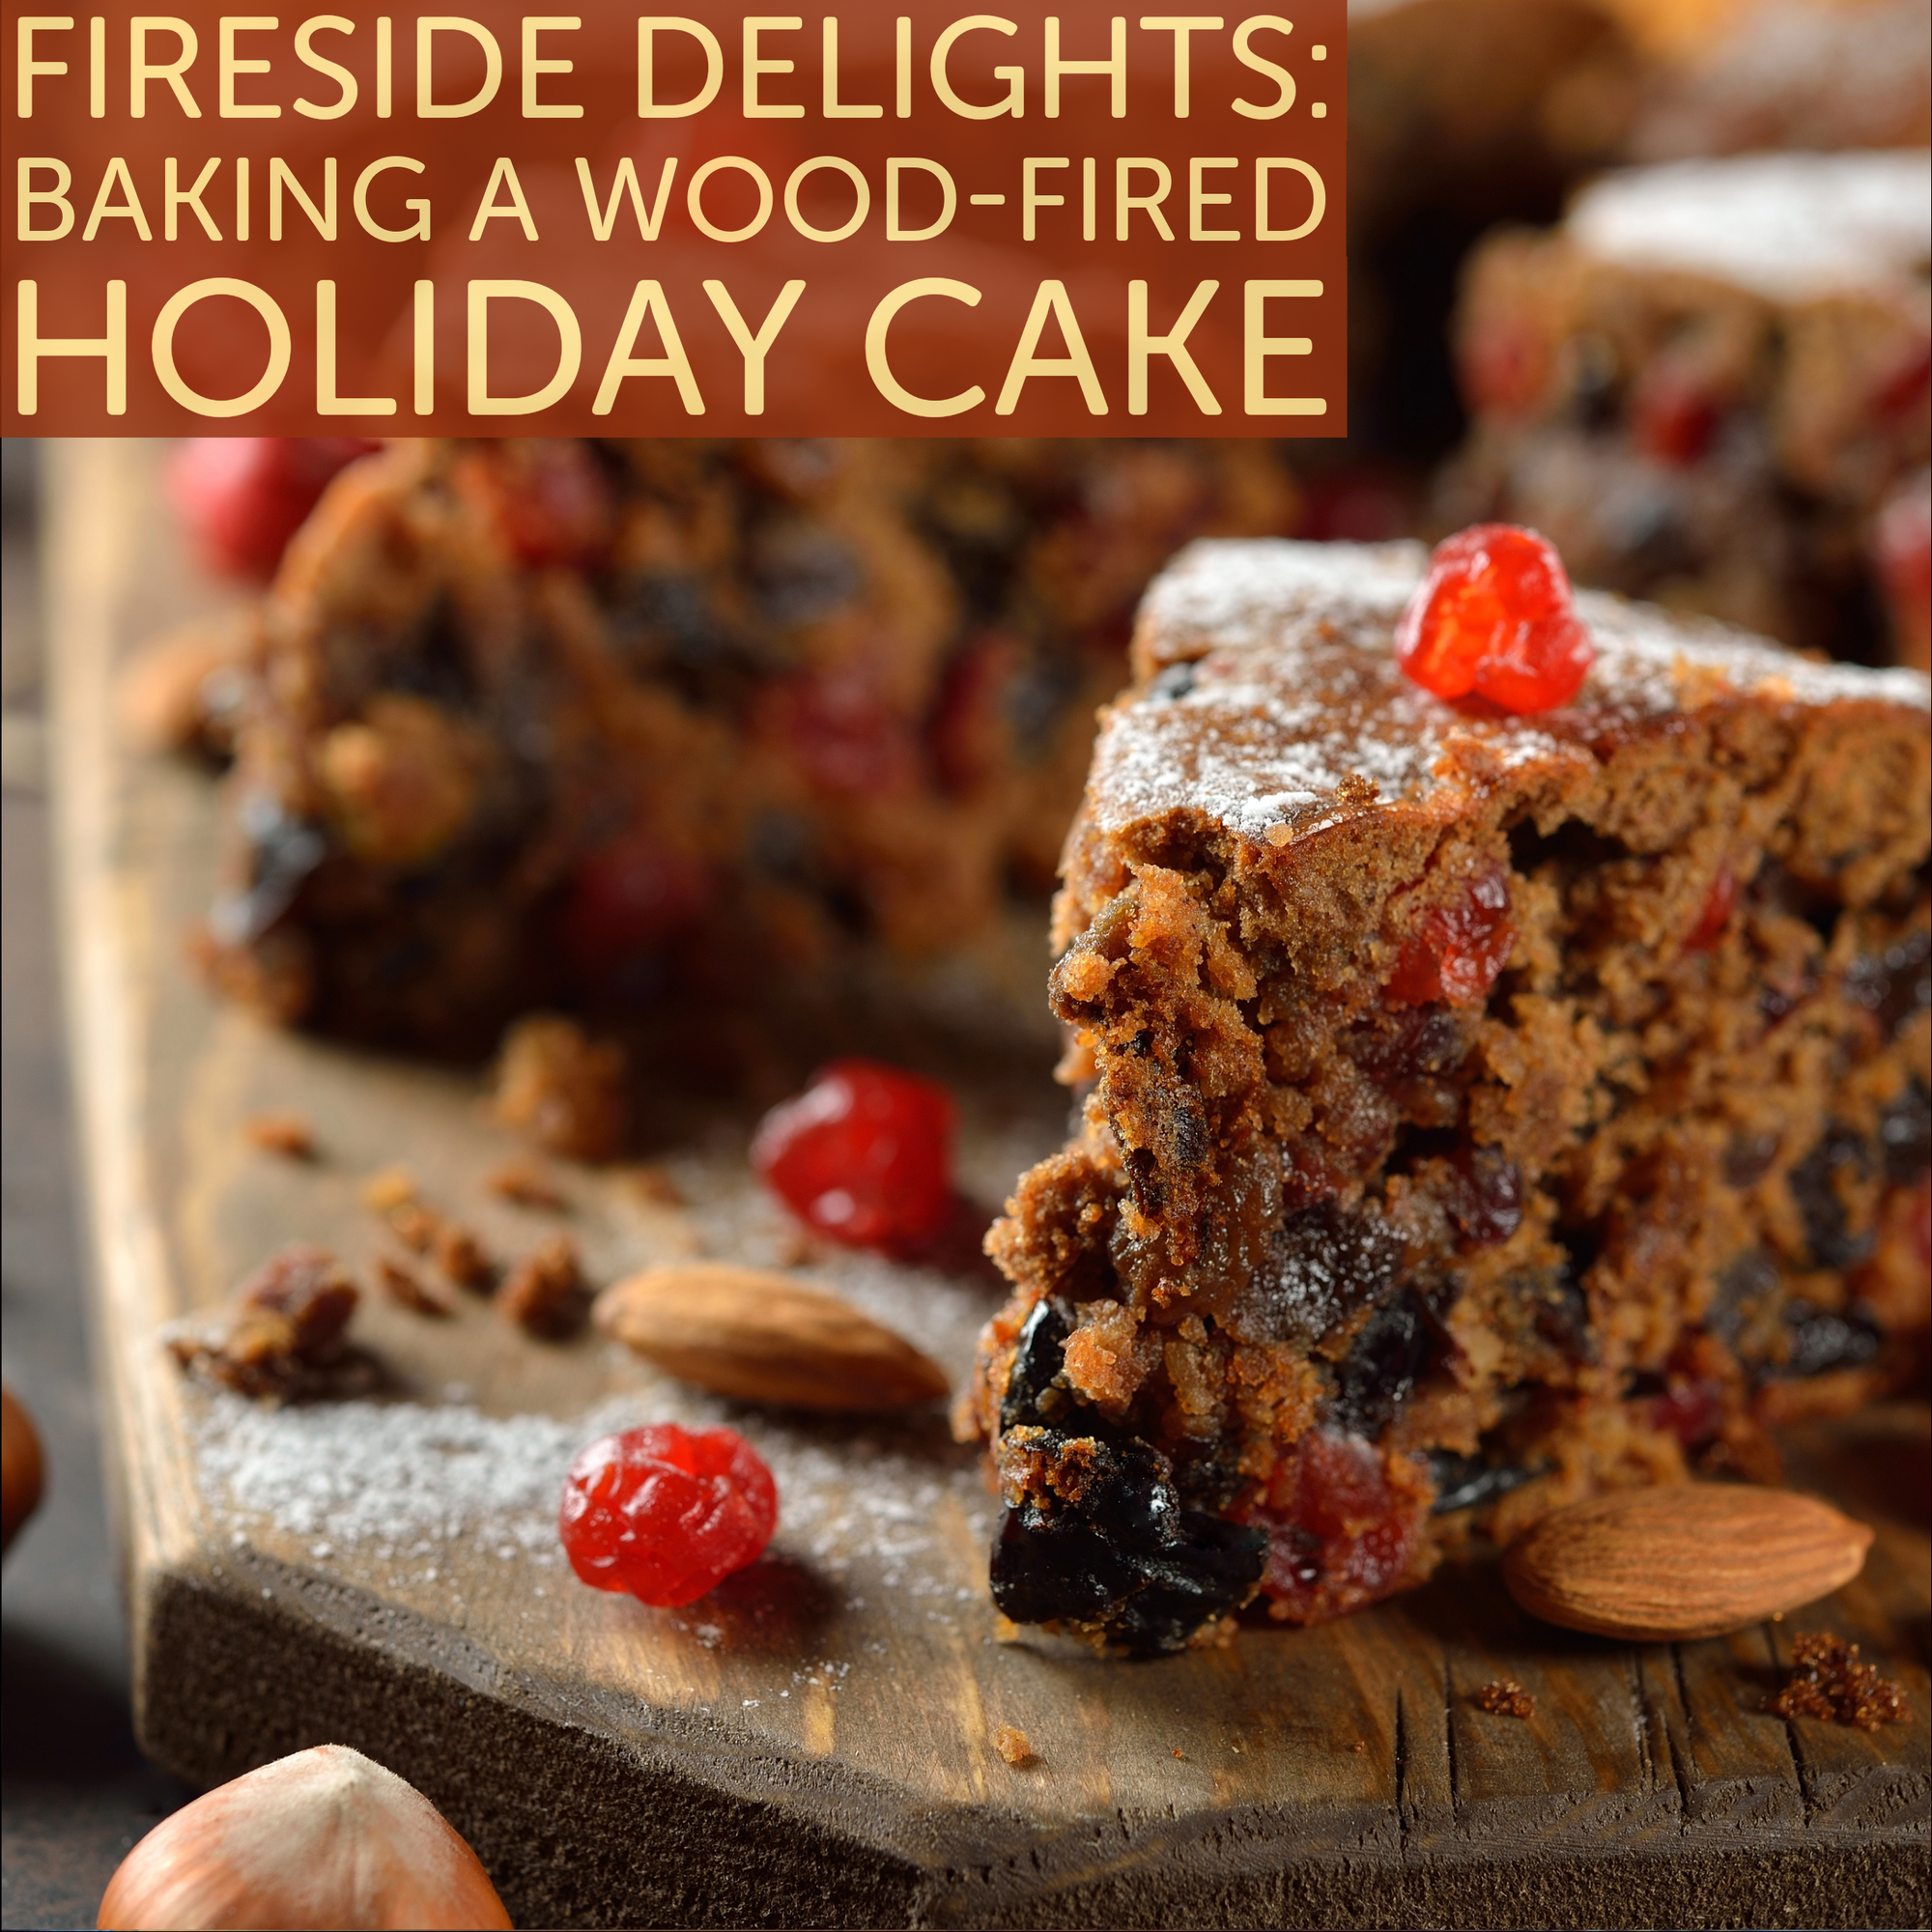 Wood-Fired Holiday Cake